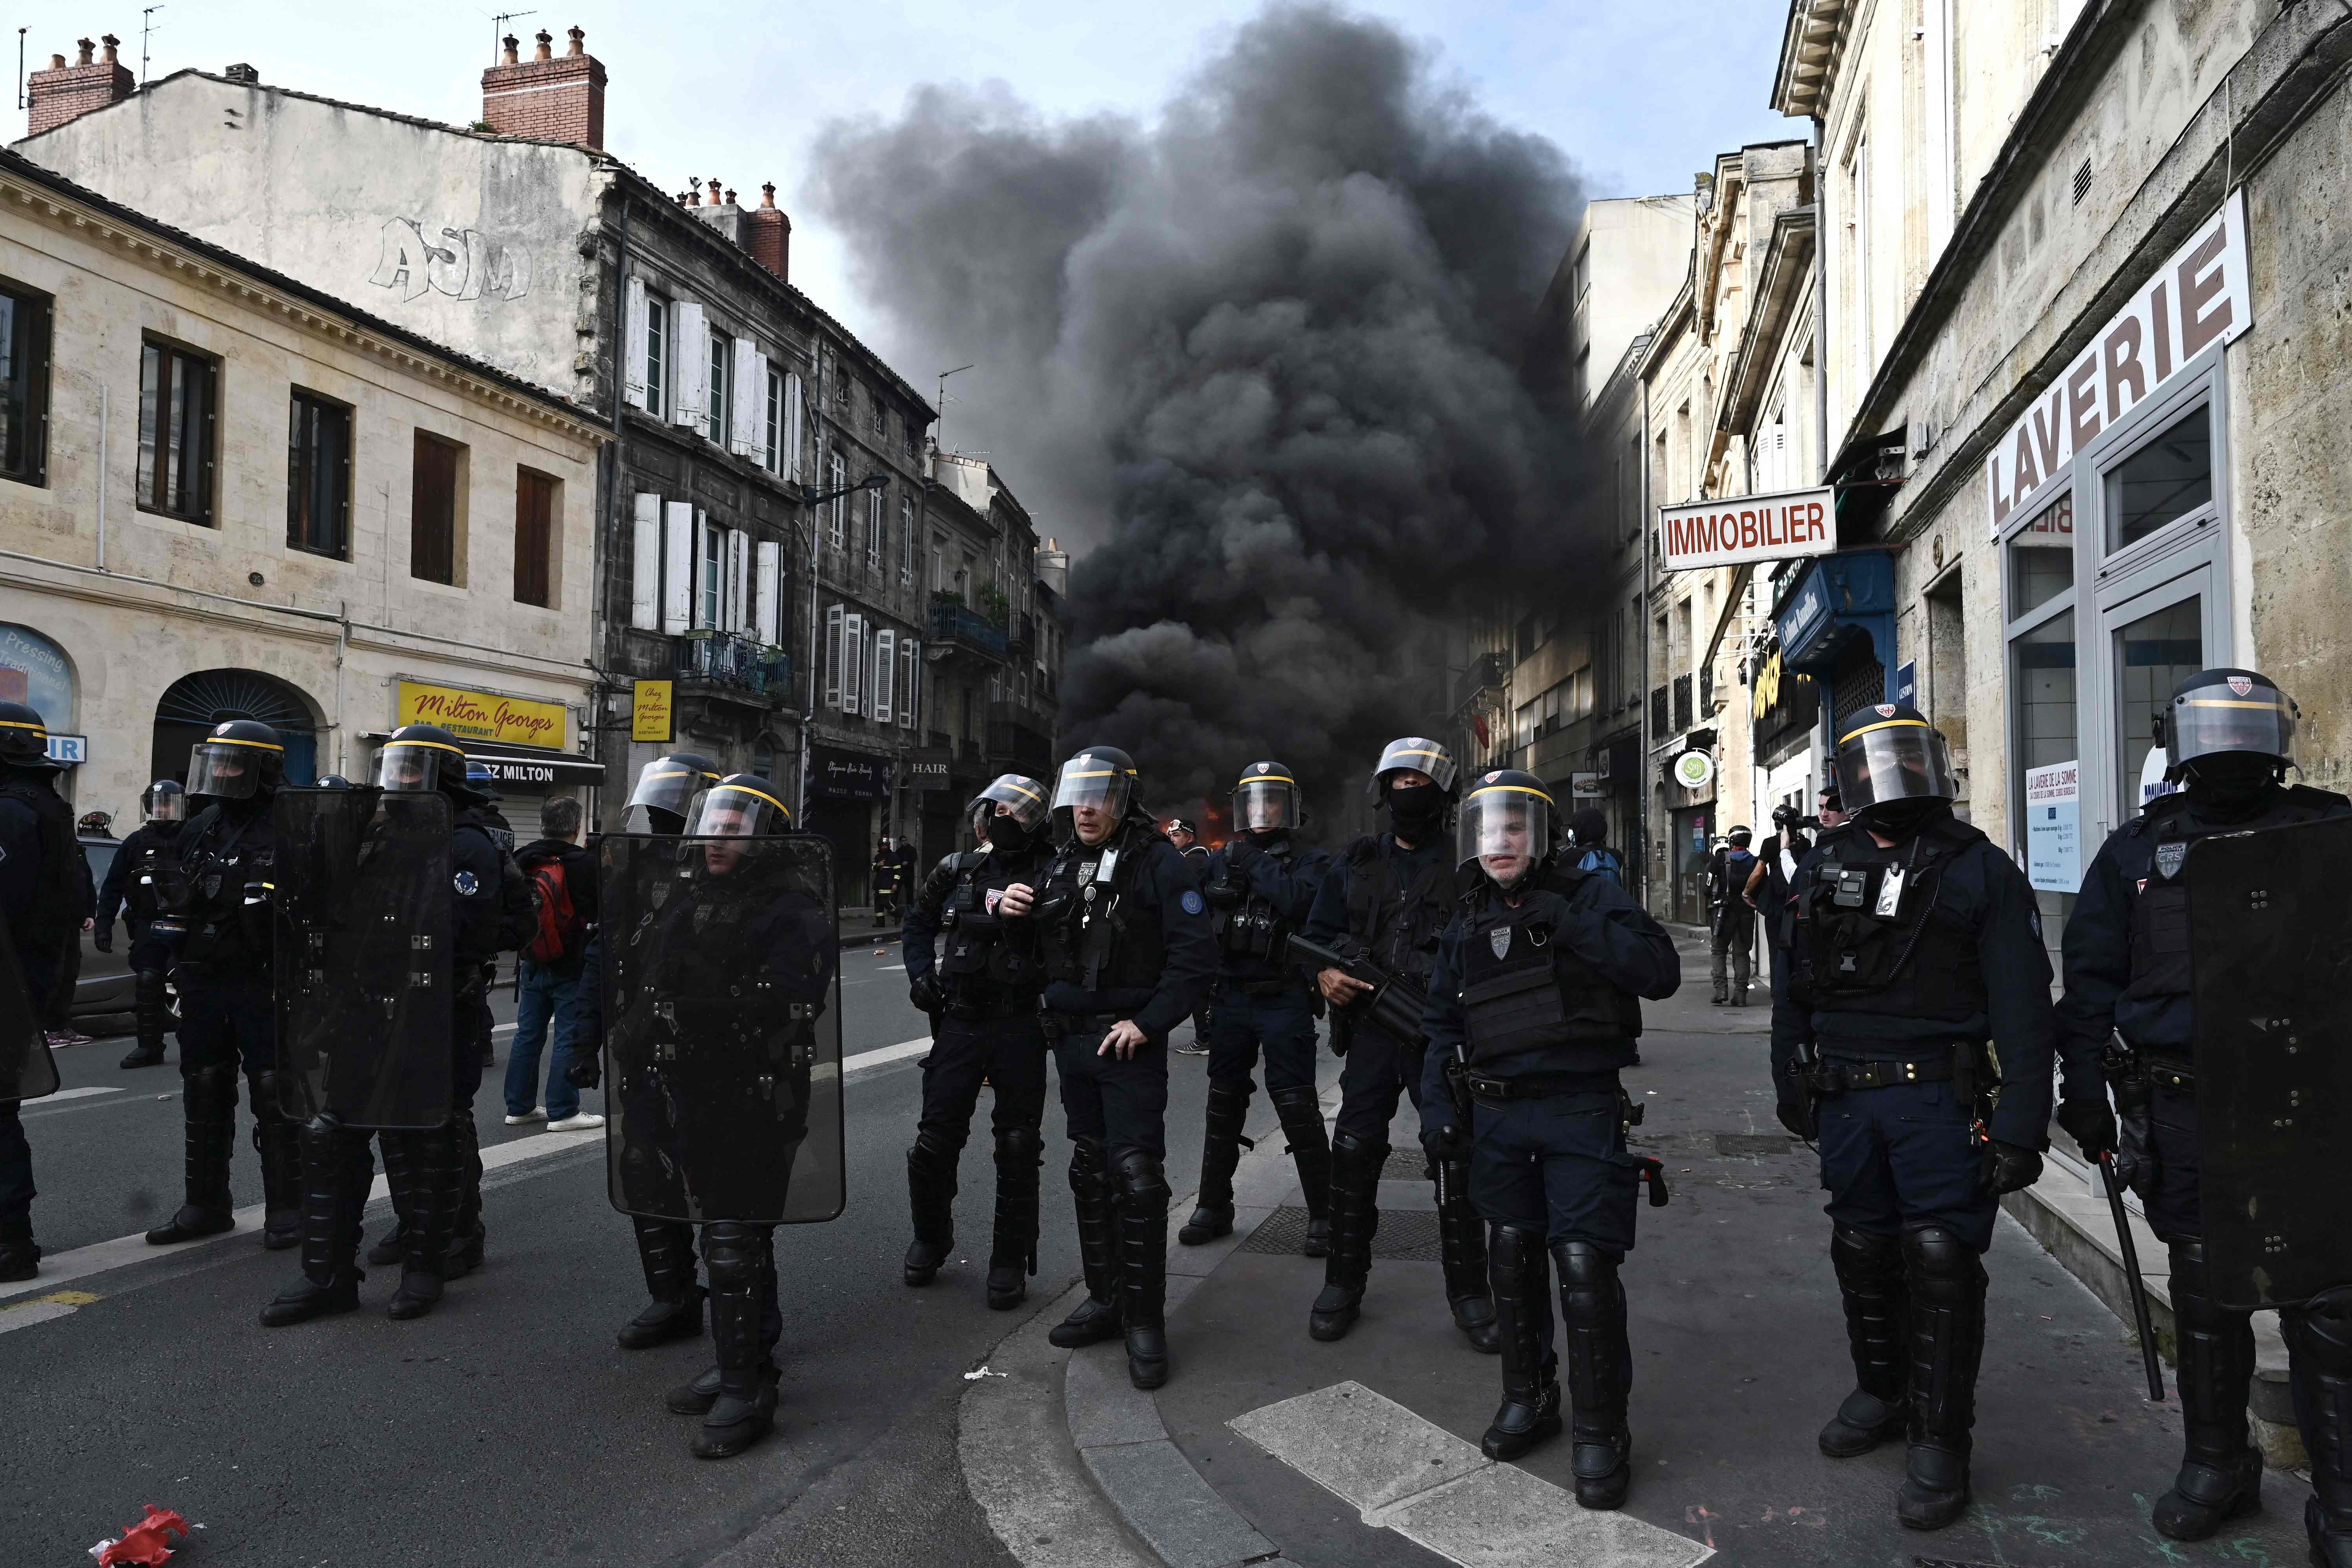 French Republican Security Corps officers faced down retirement protesters on Friday